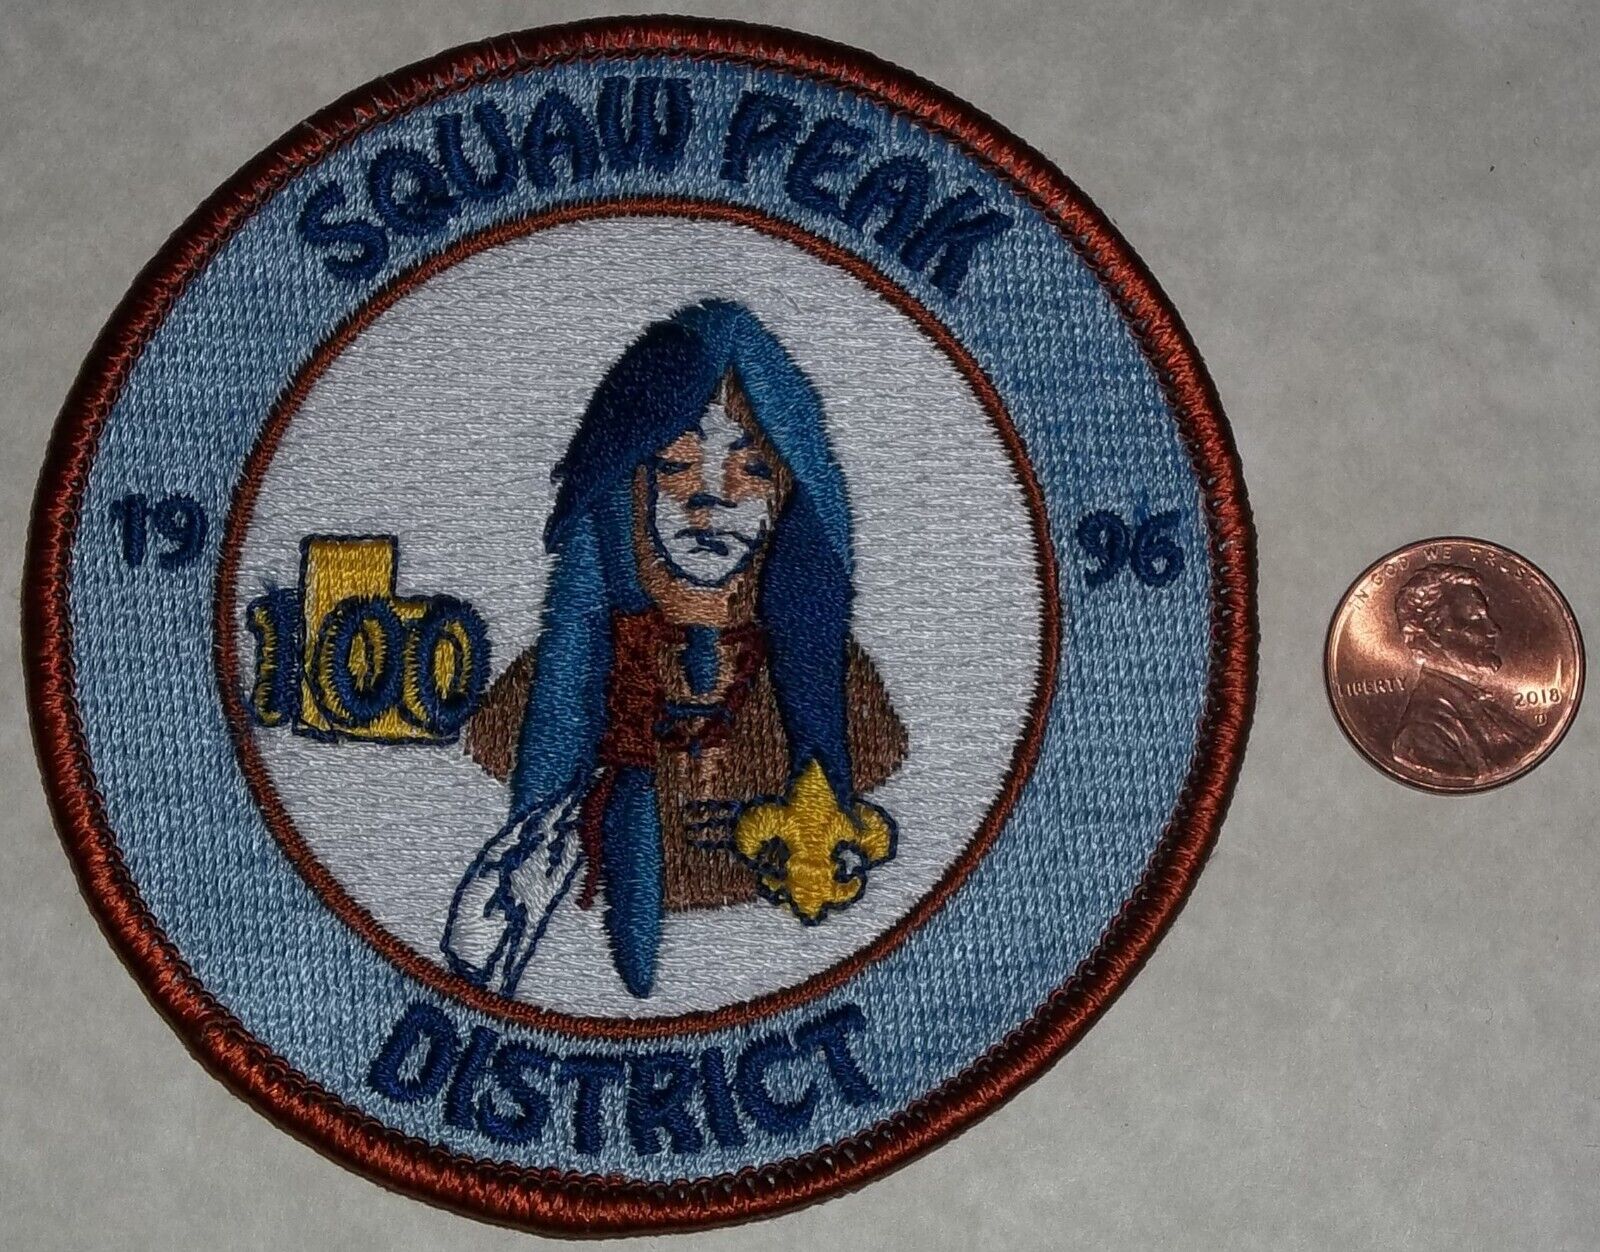 SQUAW PEAK DISTRICT OA 508 UTAH NATIONAL PARKS BSA 1996 100TH INDIAN PATCH 4\